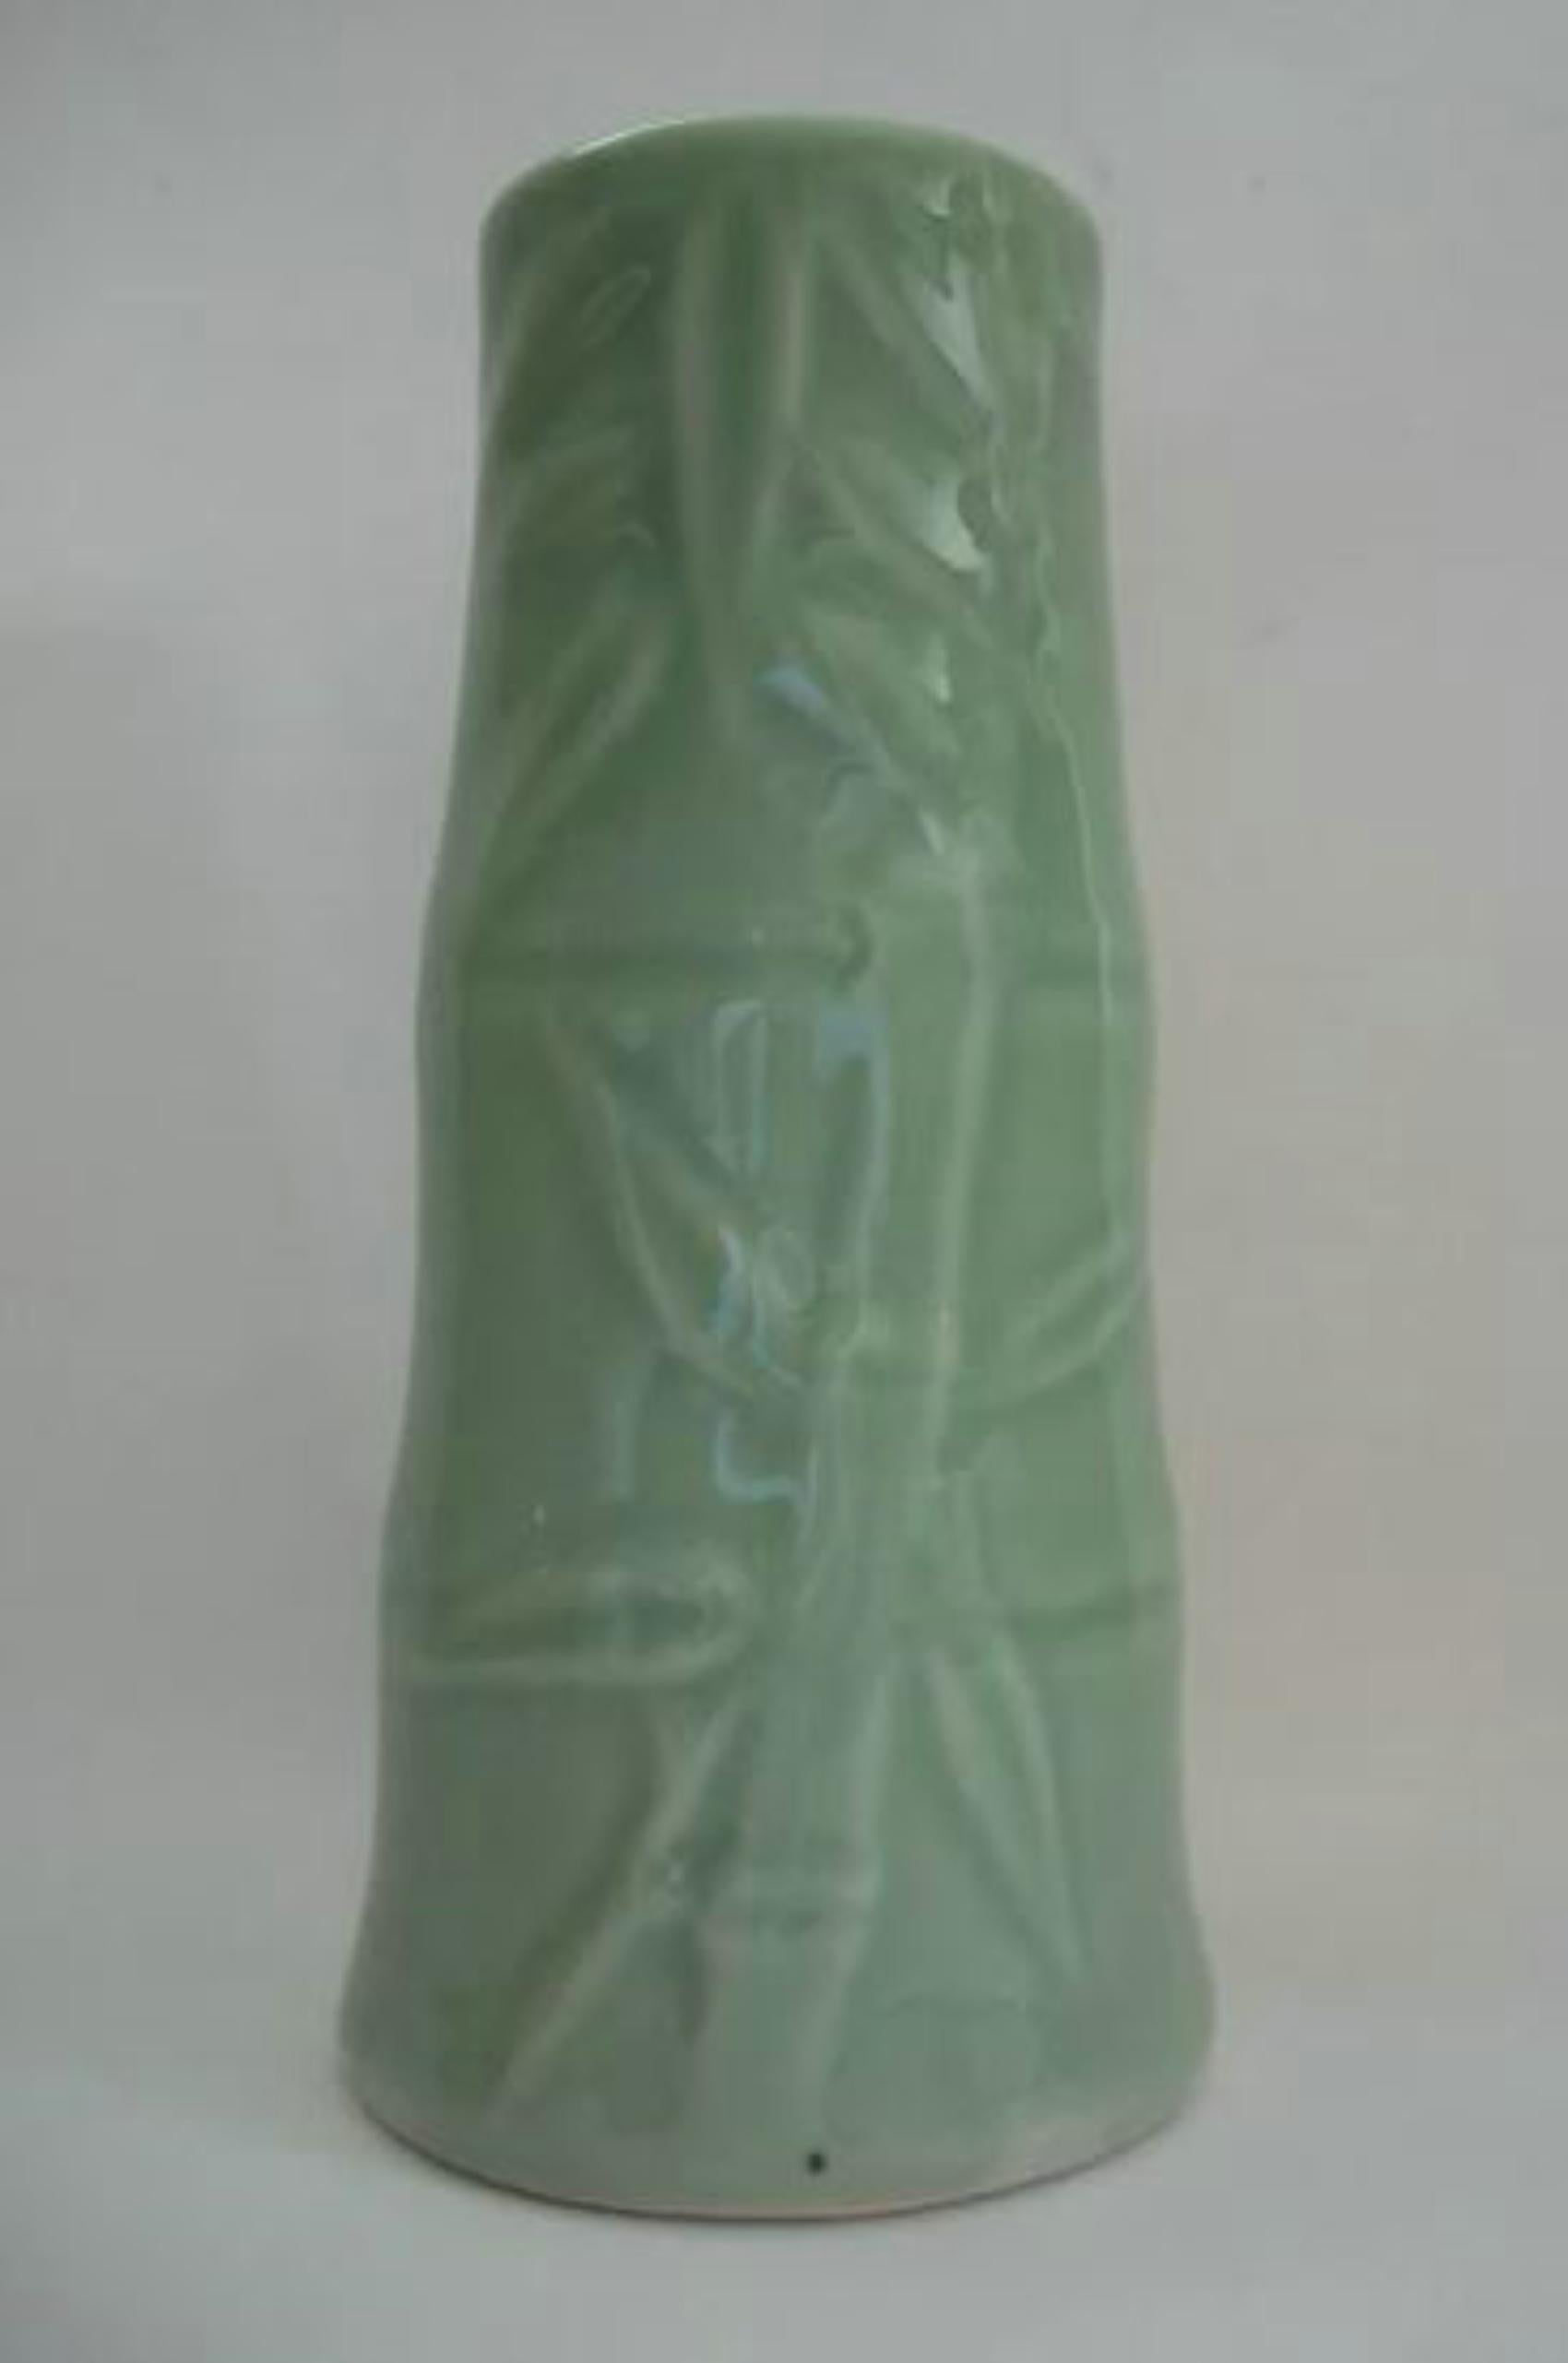 Qing Vintage Asian Celadon Glazed Vase, Bamboo Form, Unsigned, Mid 20th Century For Sale